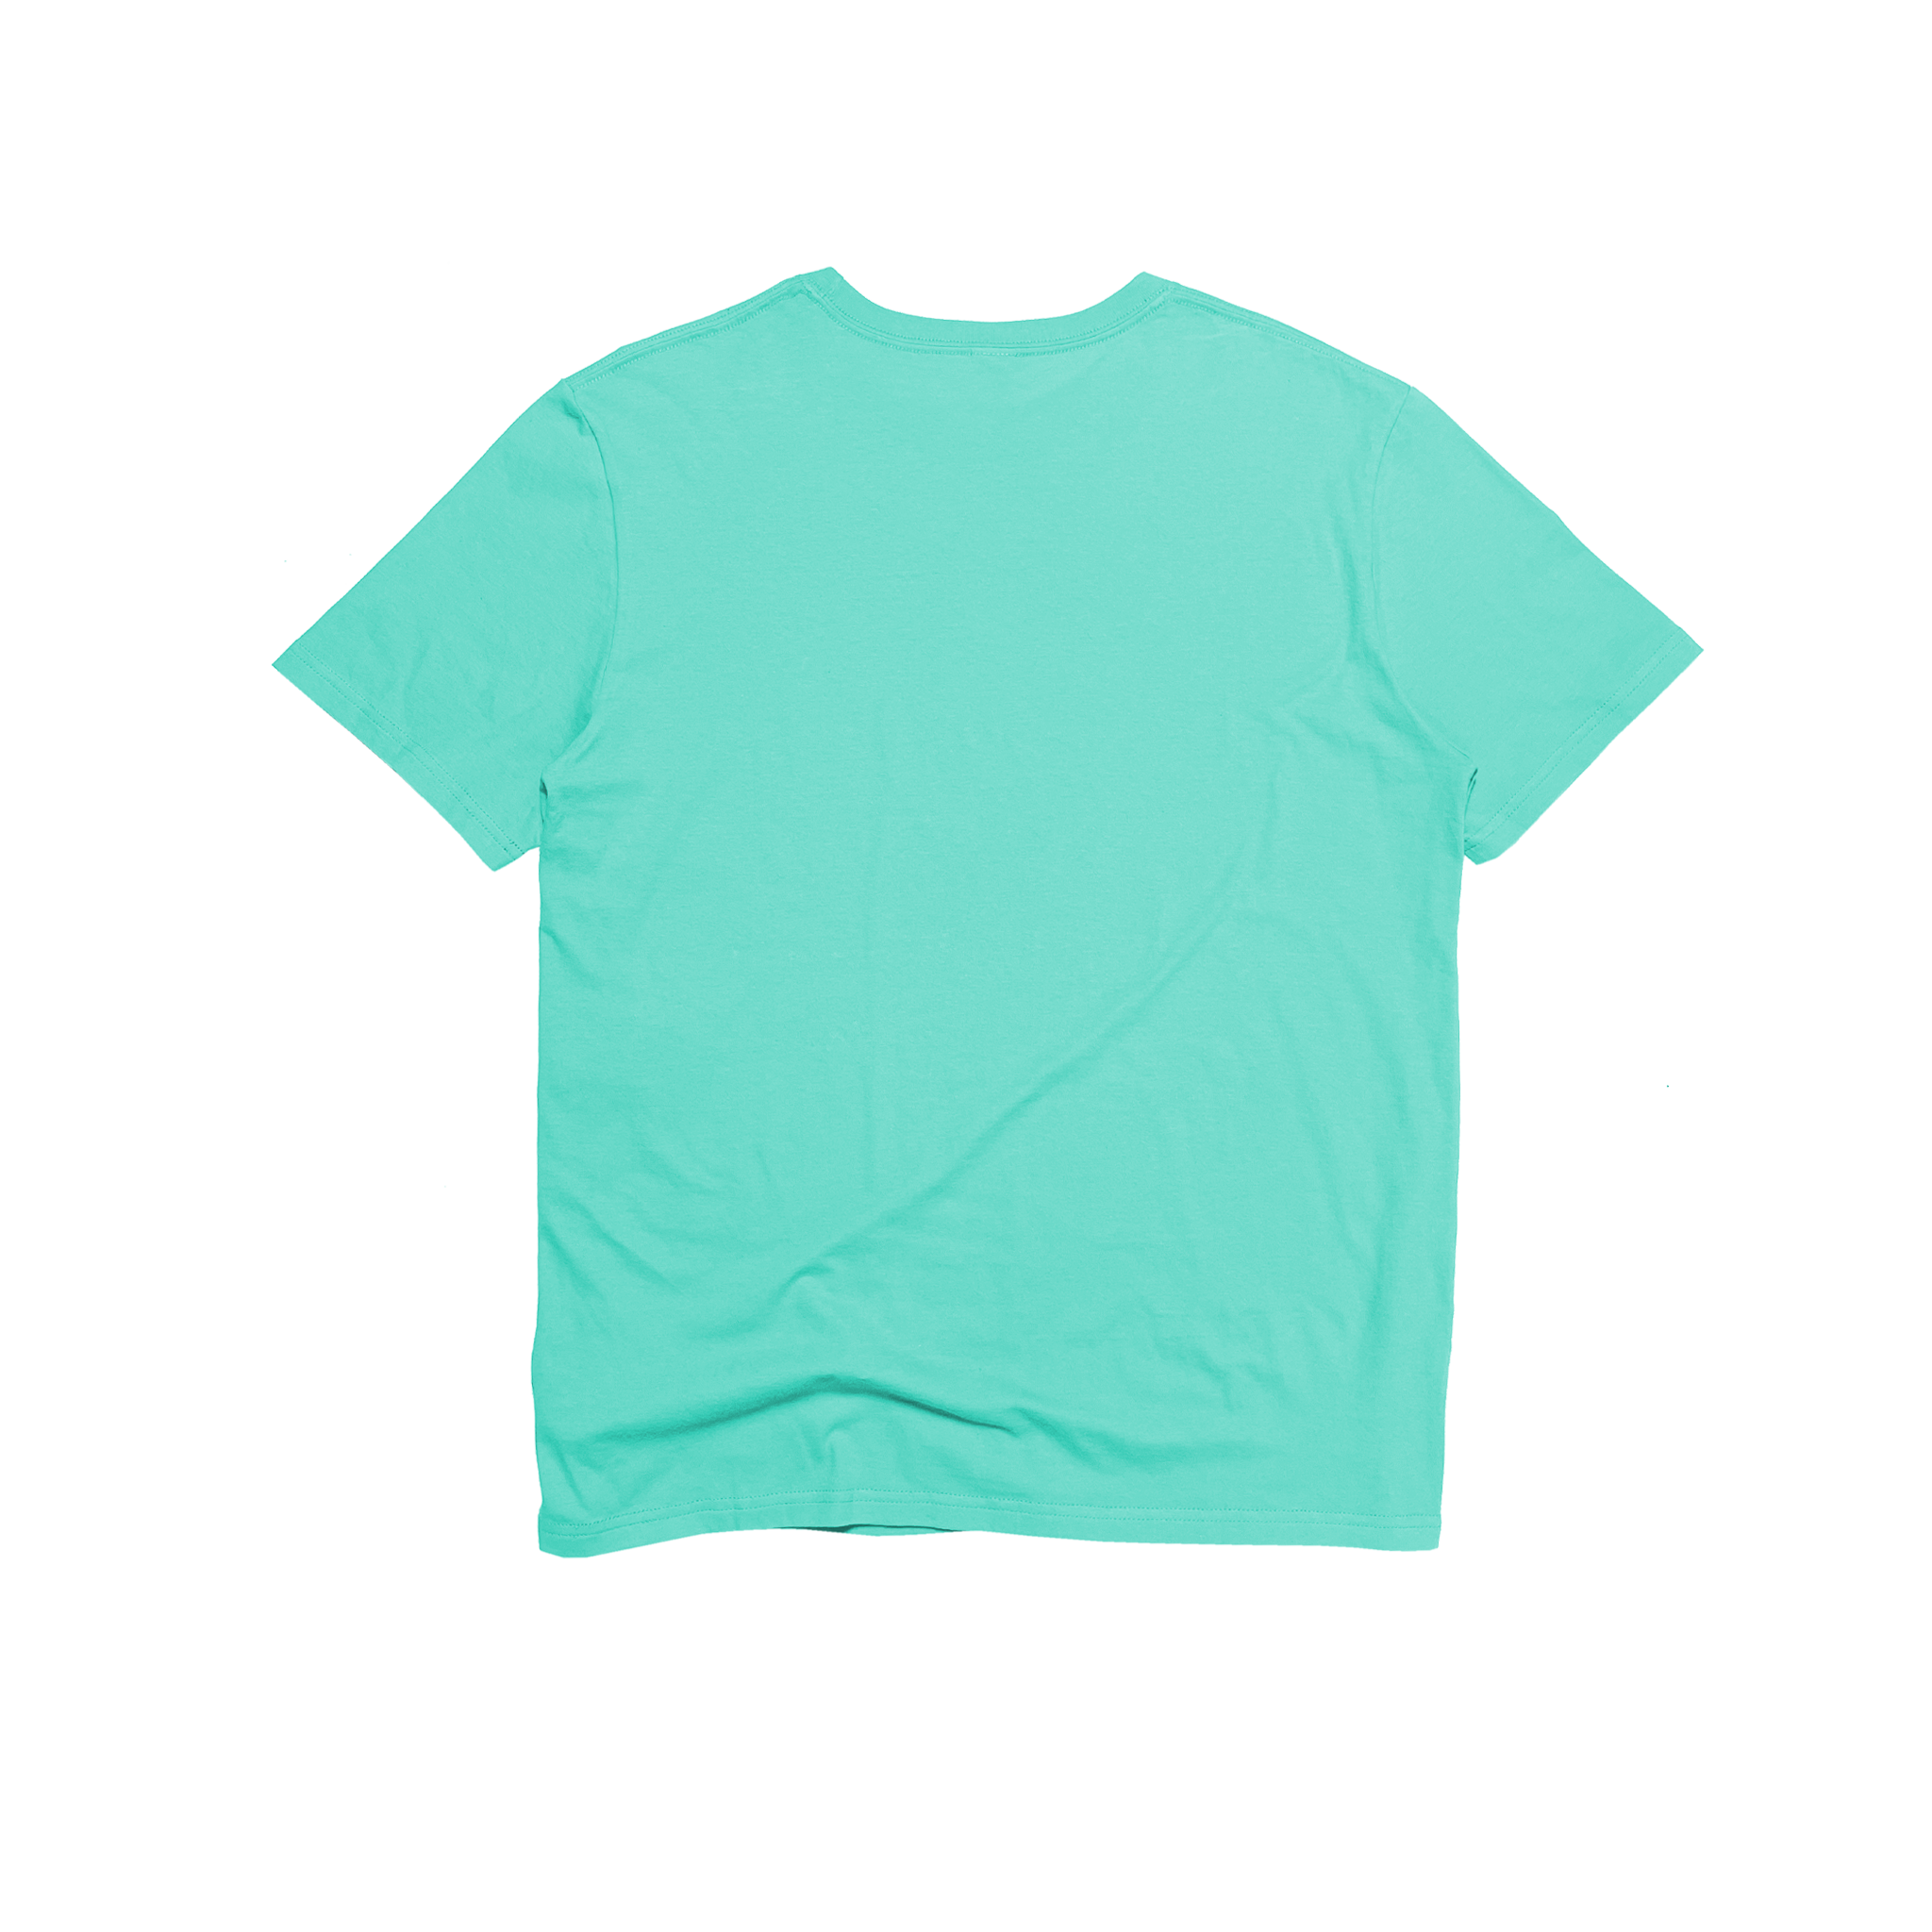 Back Flat Lay of GOEX Unisex and Men's Cotton Tee in Mint